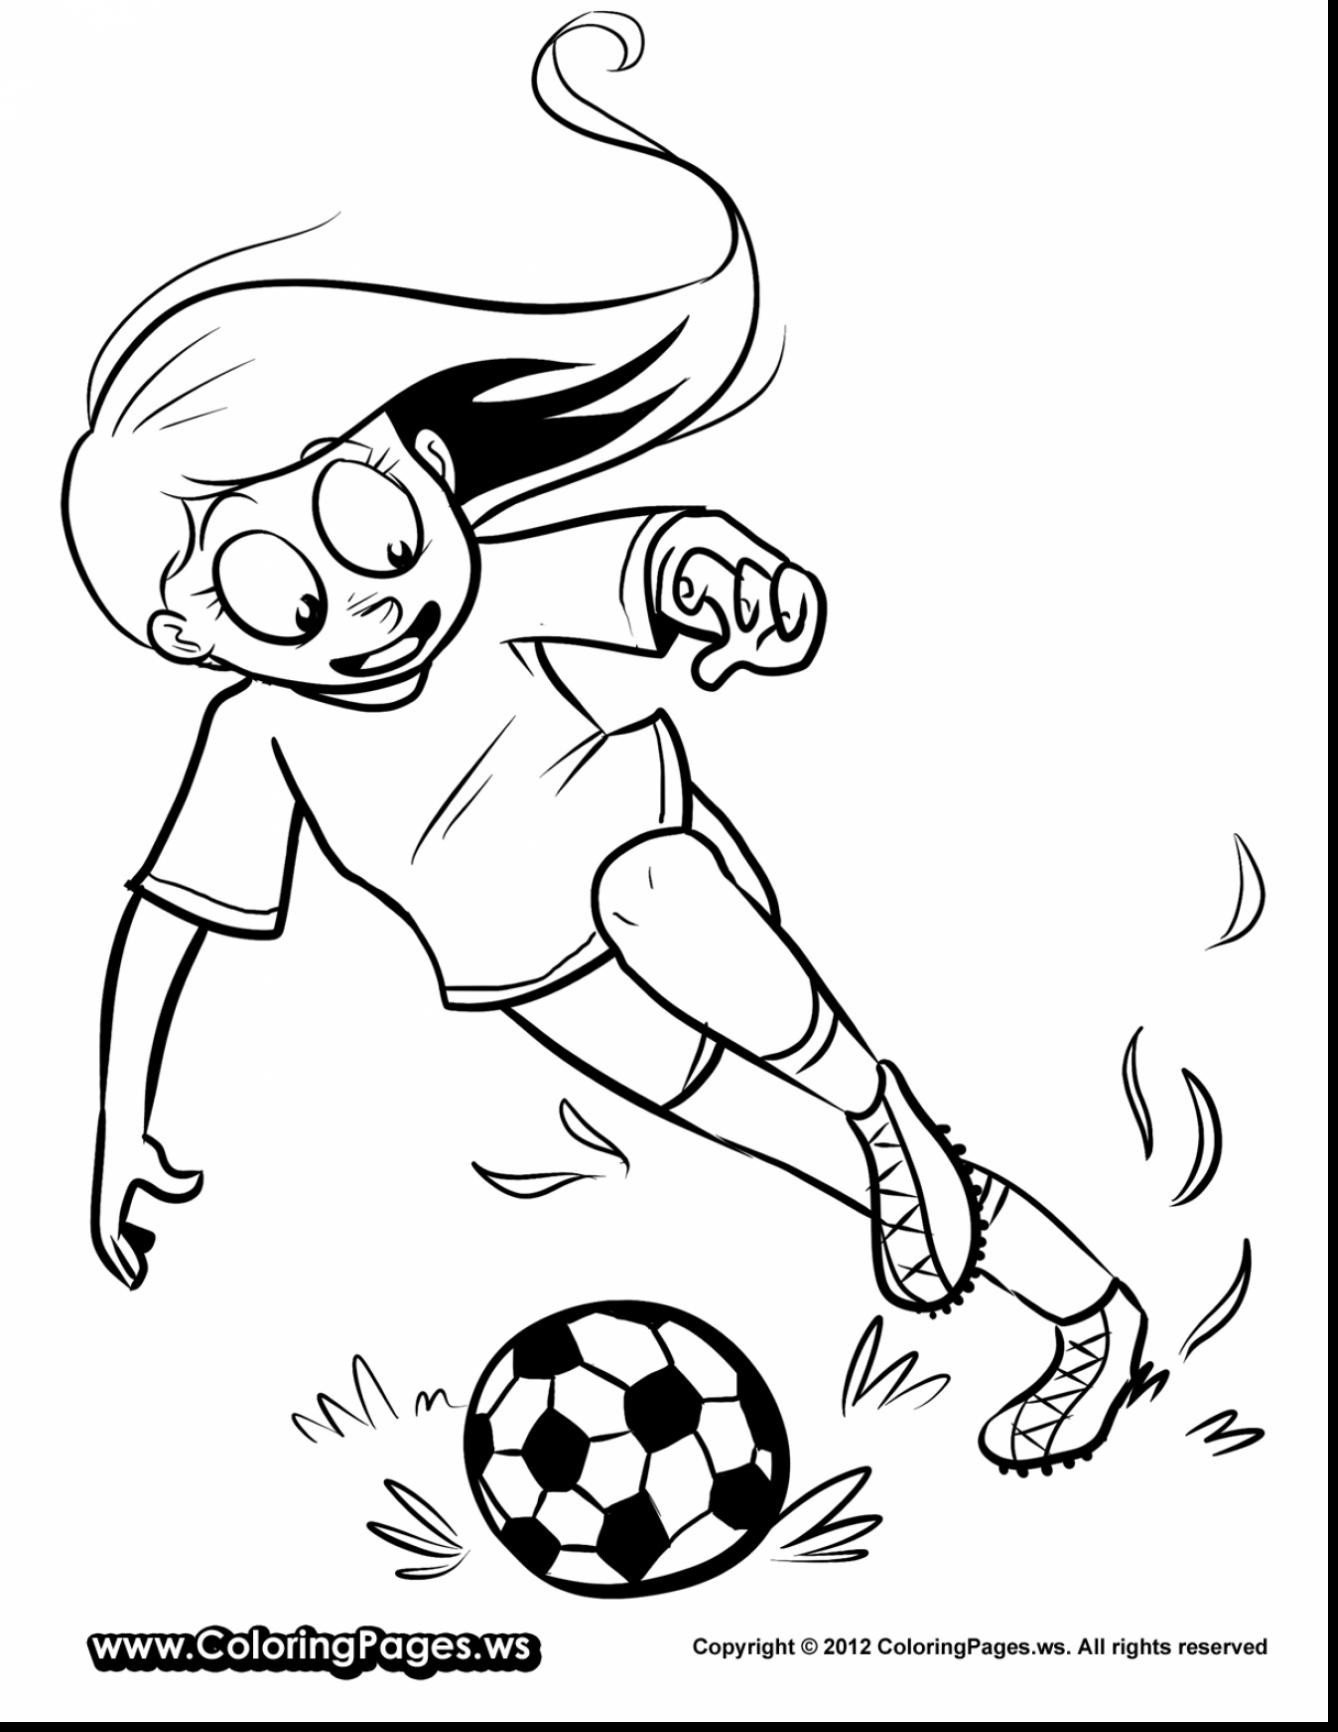 Neymar Coloring Pages At Getcolorings | Free Printable Colorings avec Dessin A Imprimer Football